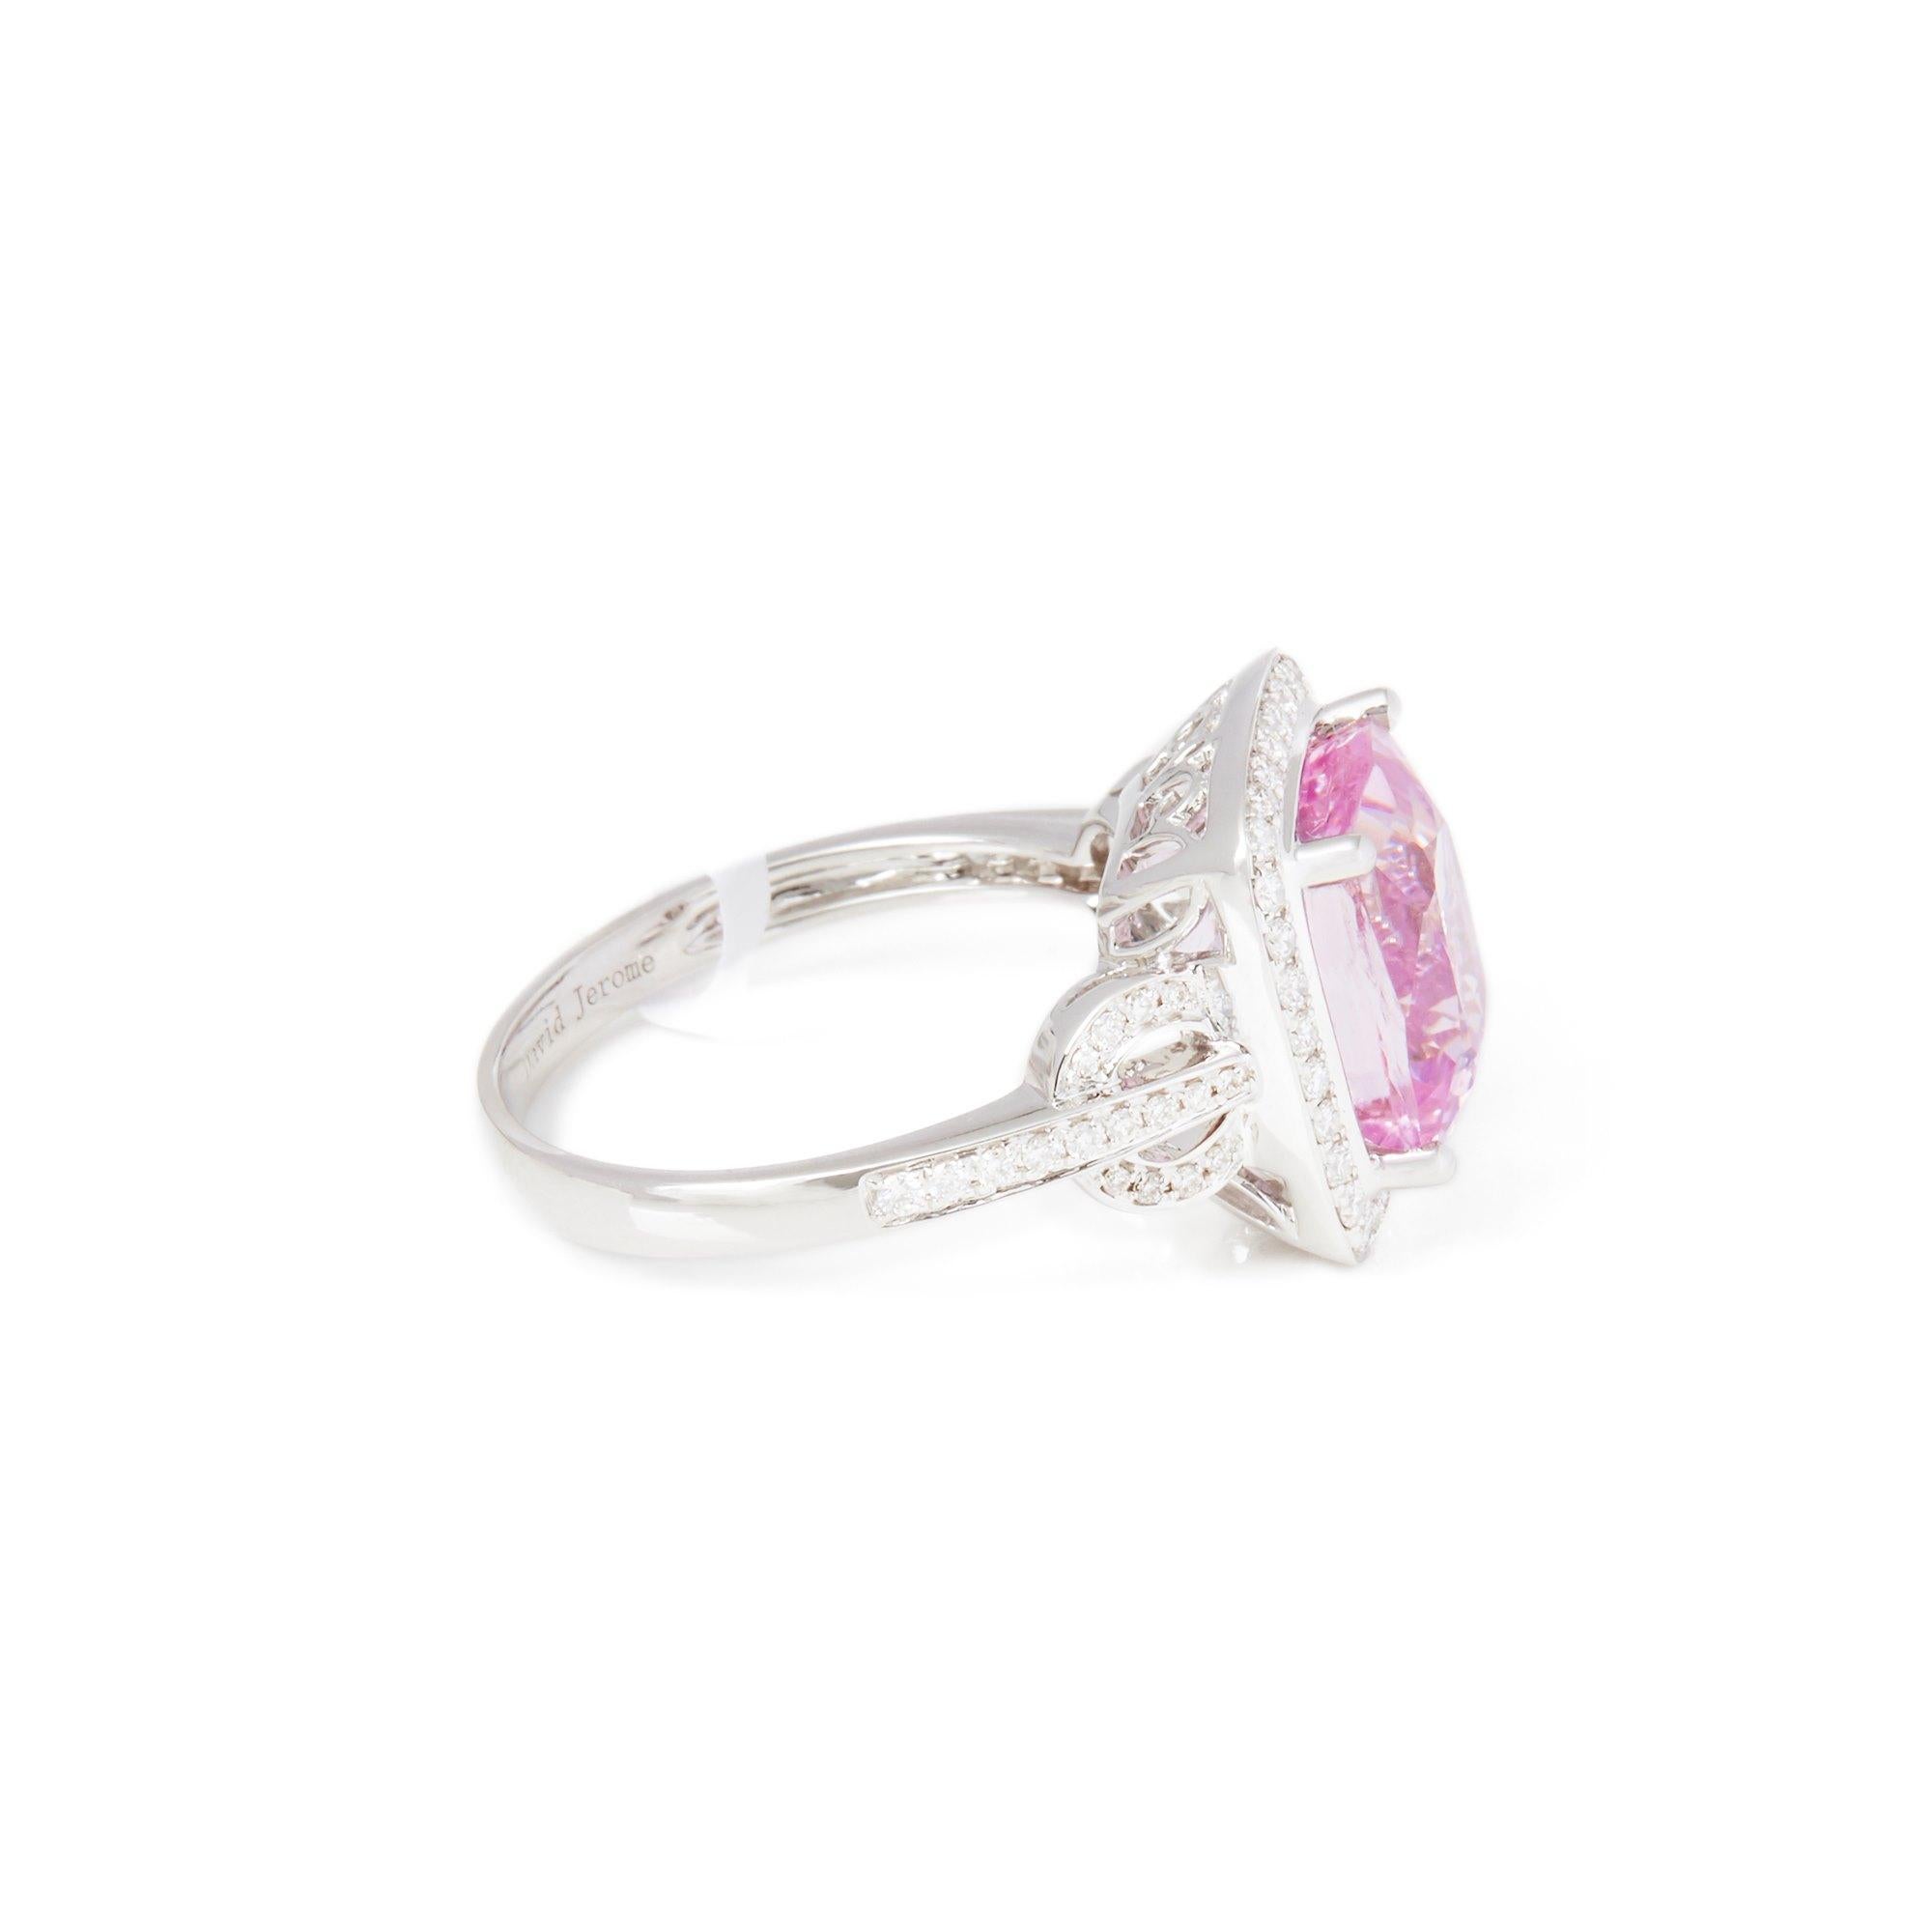 This ring designed by David Jerome is from his private collection and features one cushion cut kunzite totalling 5.69cts sourced in Afghanistan. Set with round brilliant cut Diamonds totalling 0.40cts mounted in an 18k white gold setting. UK finger